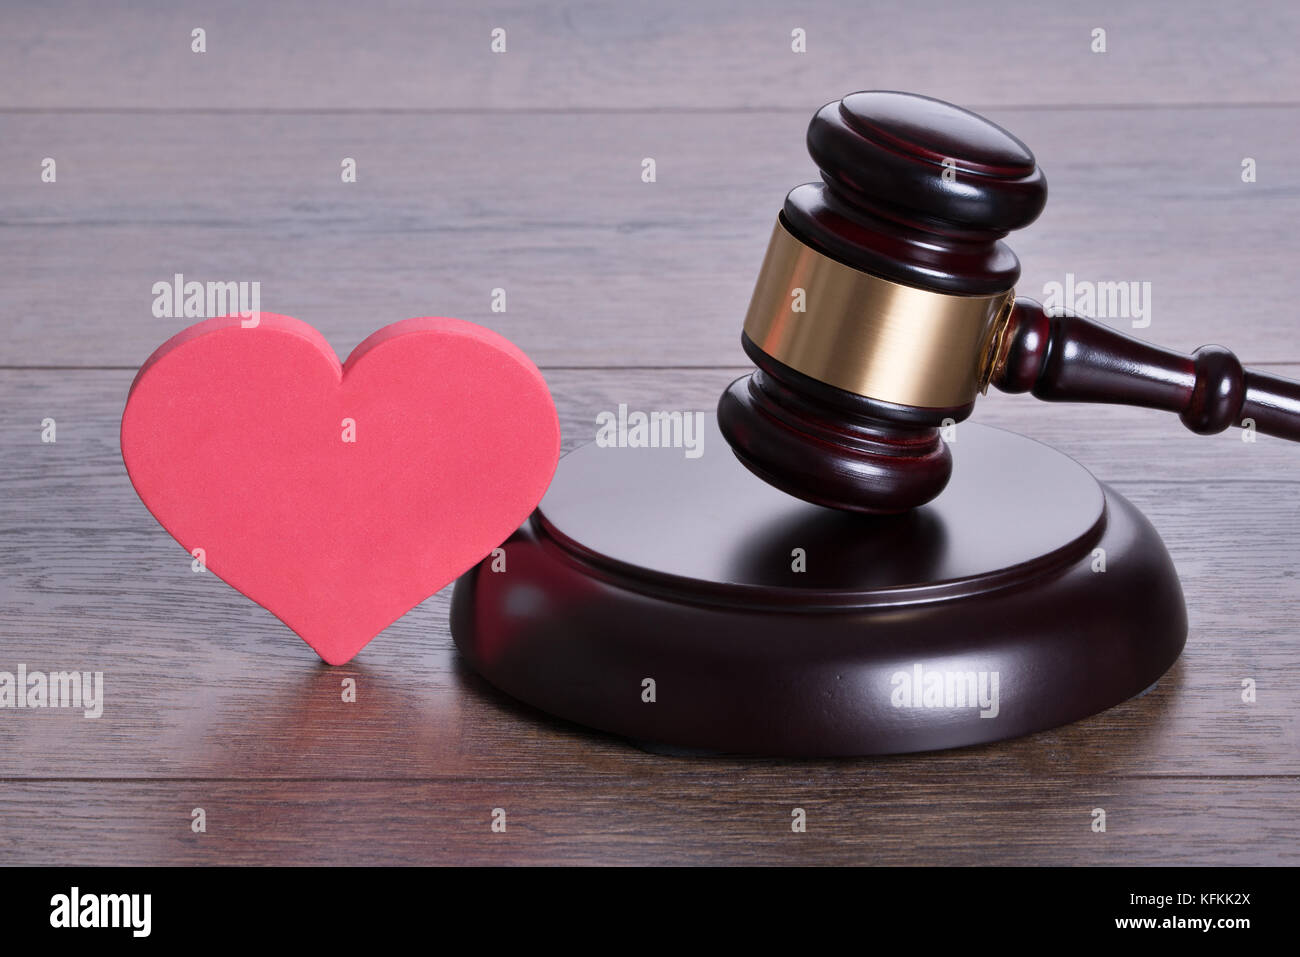 Judge gavel and heart shape in divorce concept Stock Photo